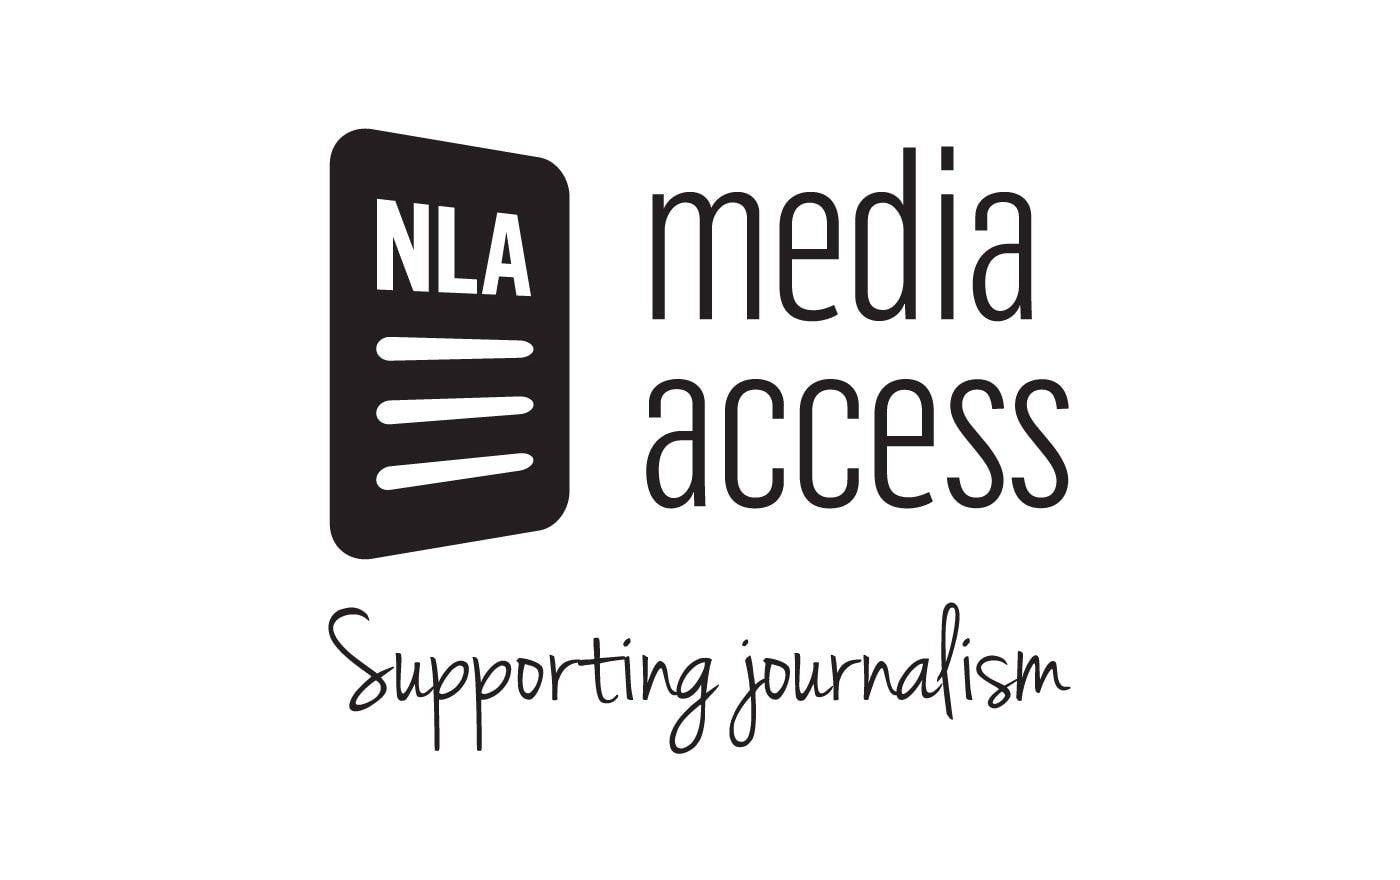 NLA Media Access: Content licensing and copyright protection for publishers